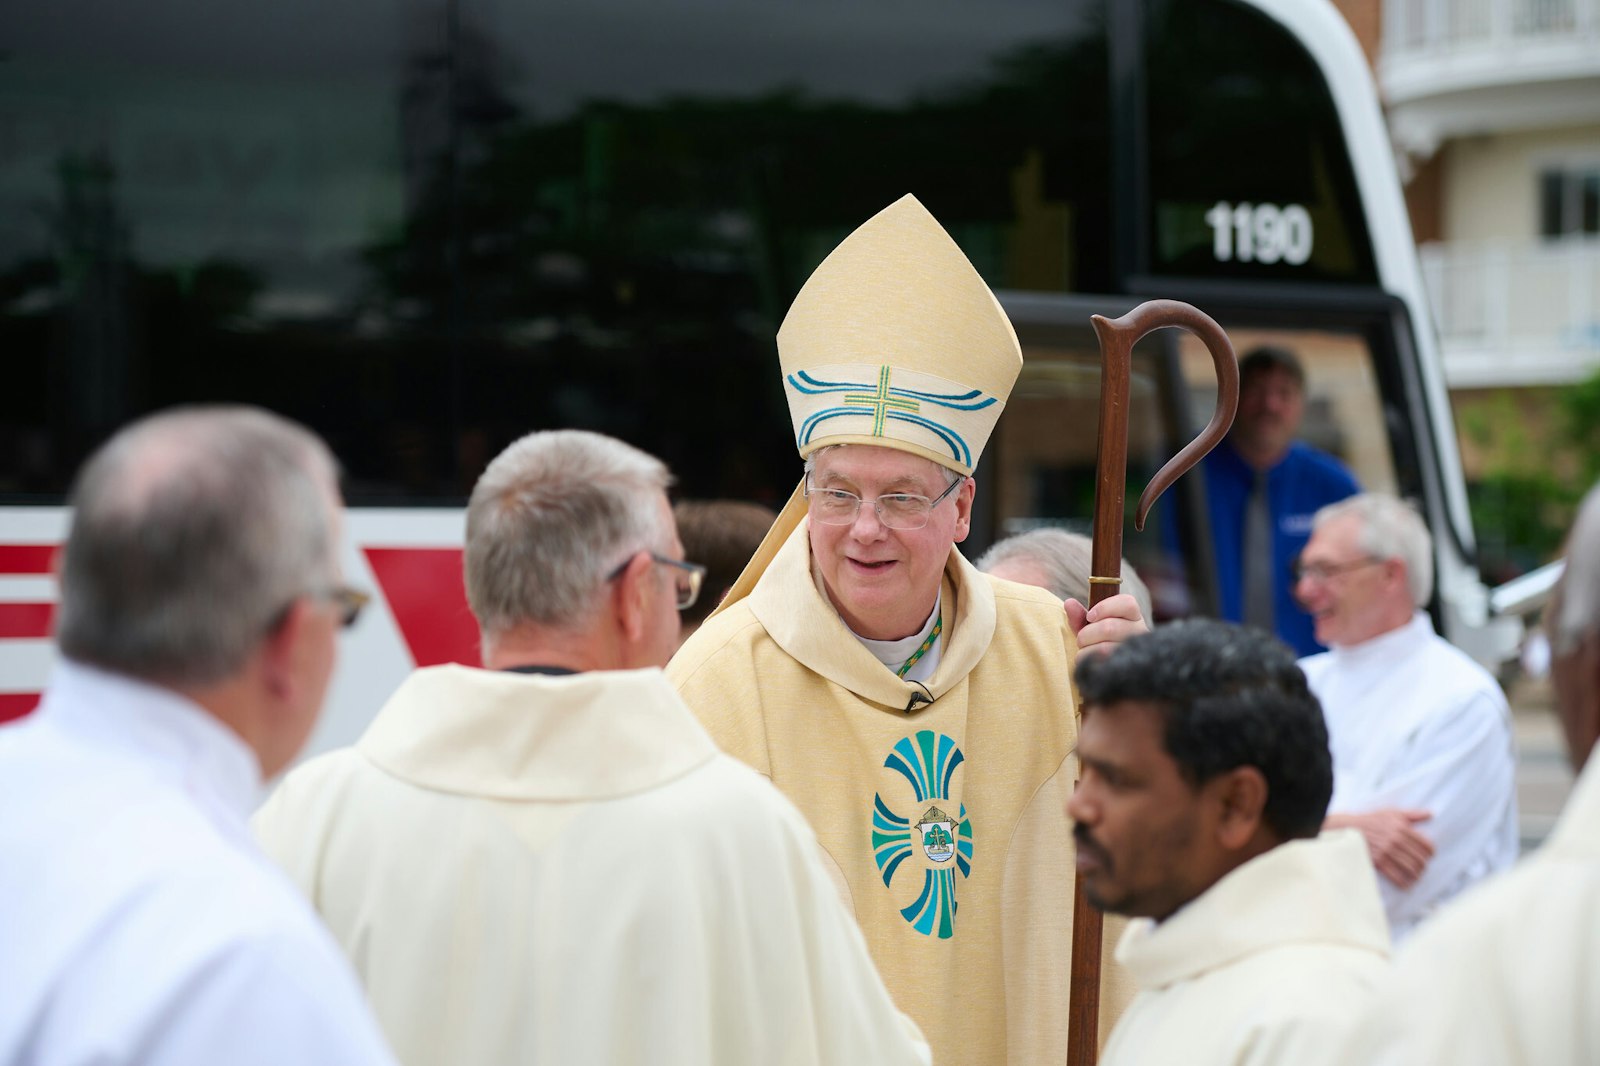 Bishop Battersby greets friends, well-wishers, clergy and faithful of the Diocese of La Crosse outside the Cathedral of St. Joseph the Workman following his installation Mass on May 20.